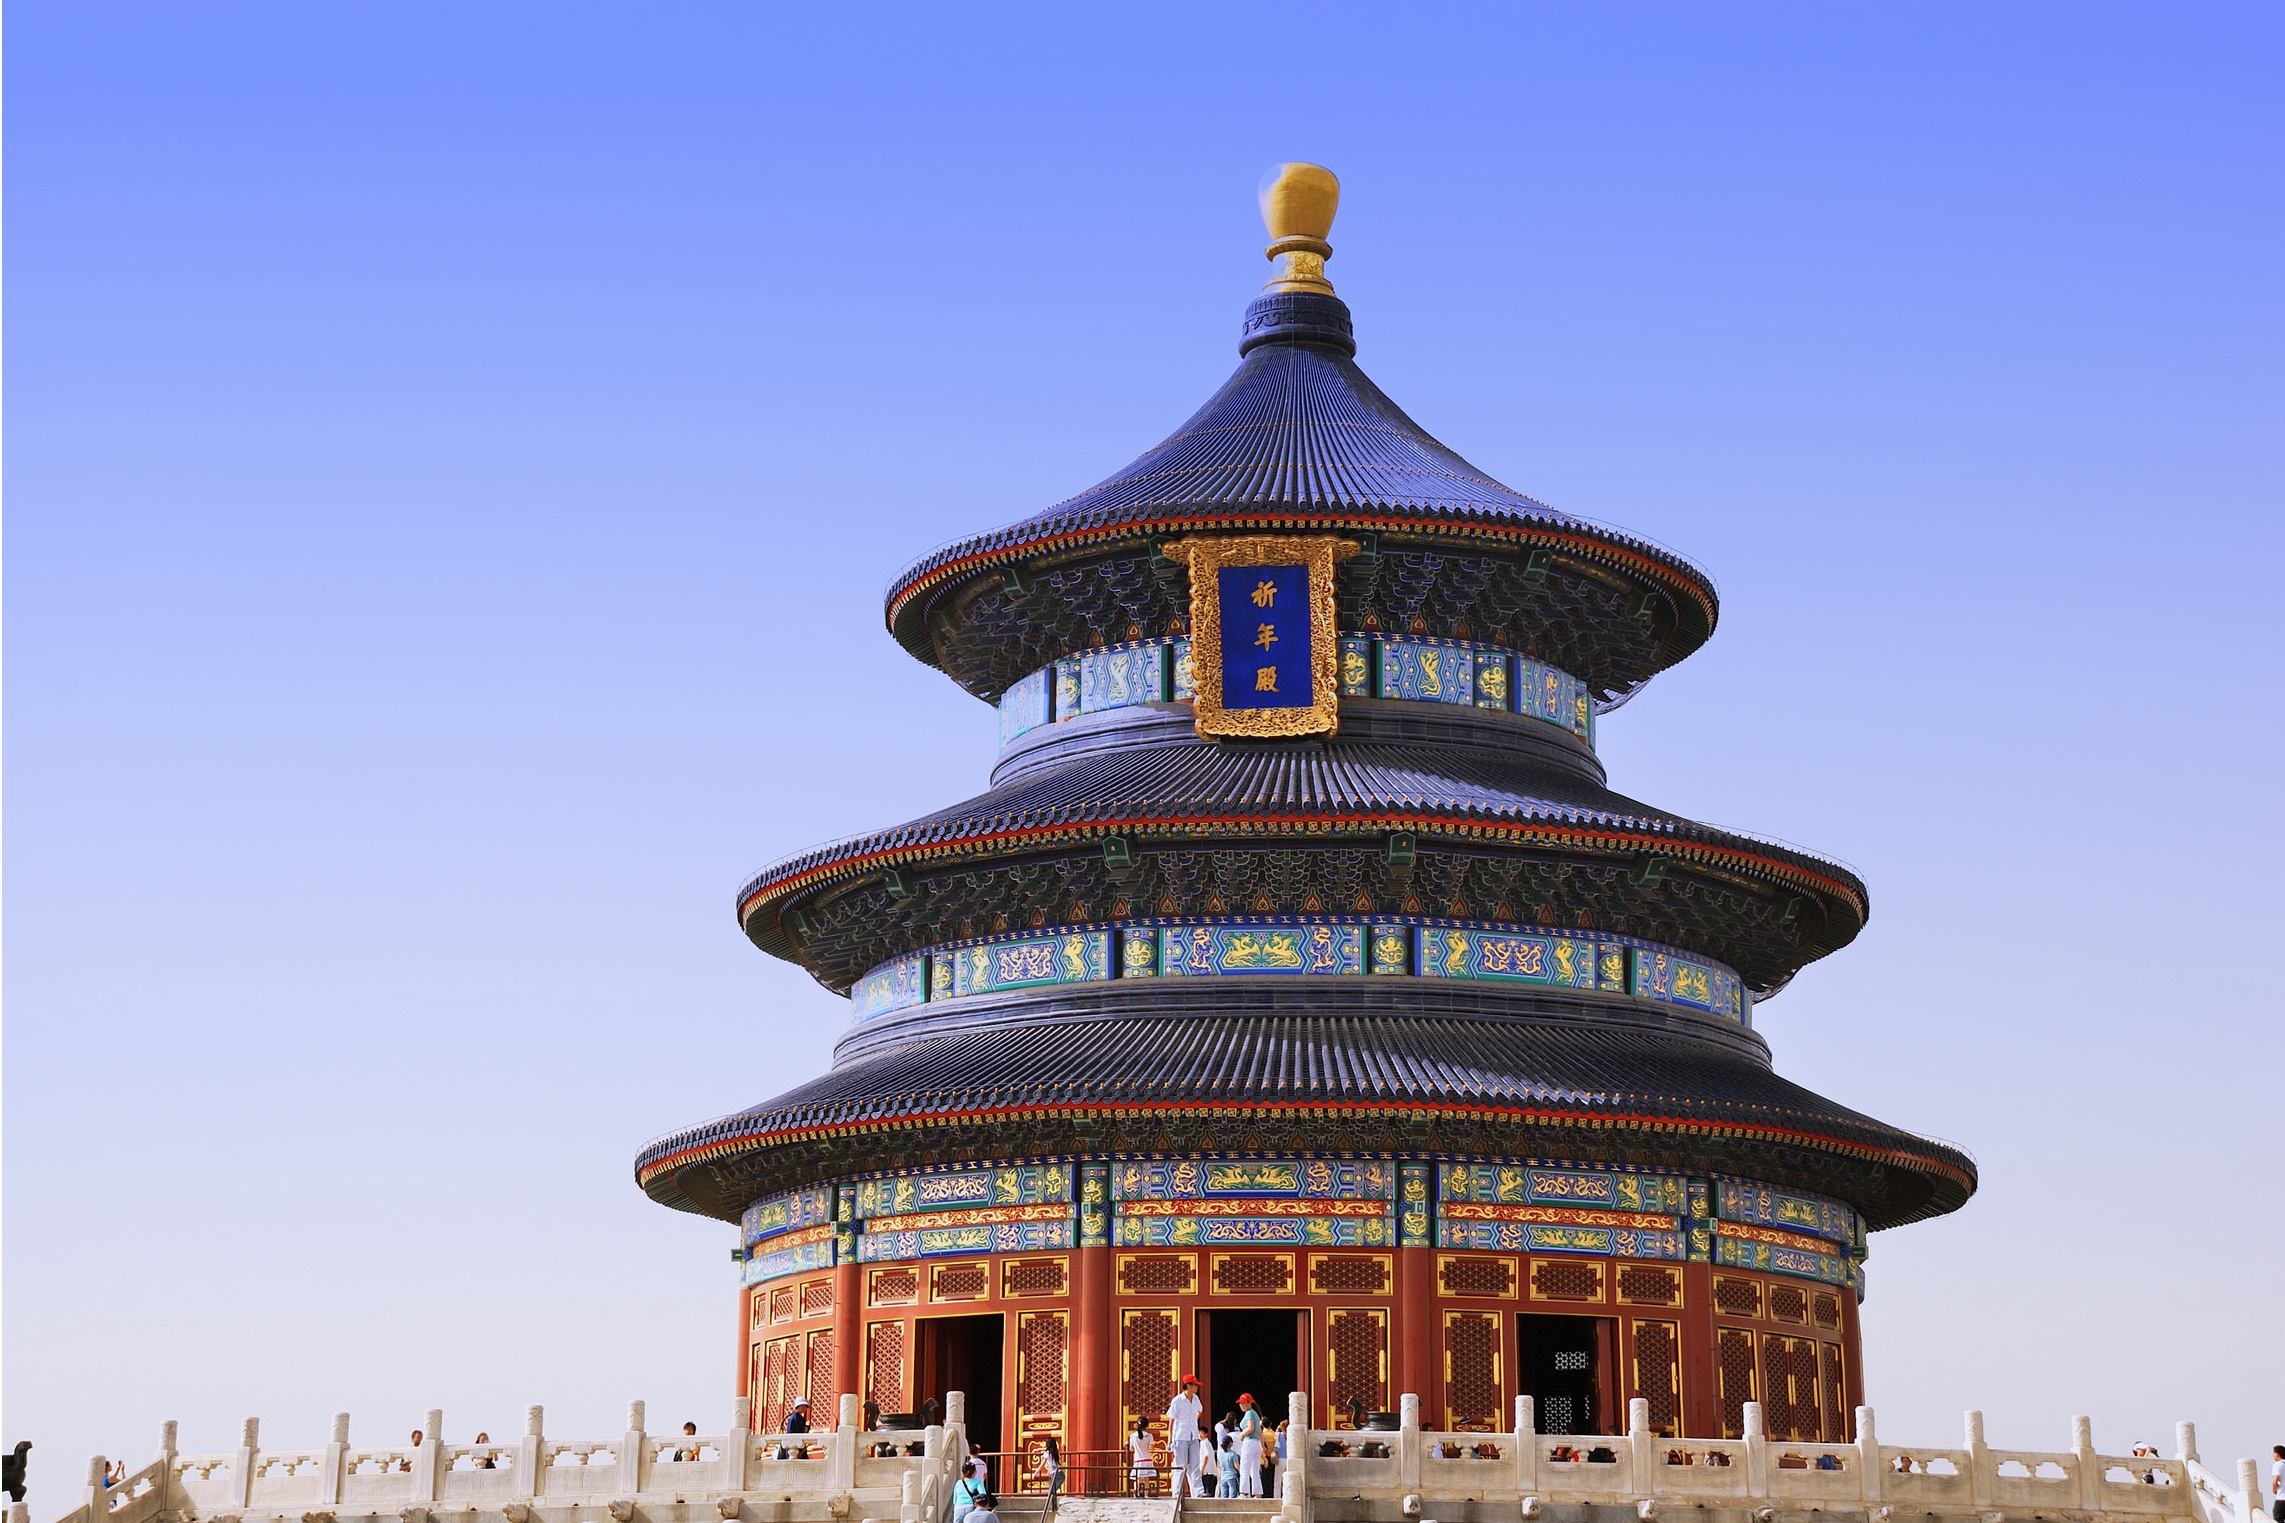 highlight-of-central-axis-temple-of-heaven